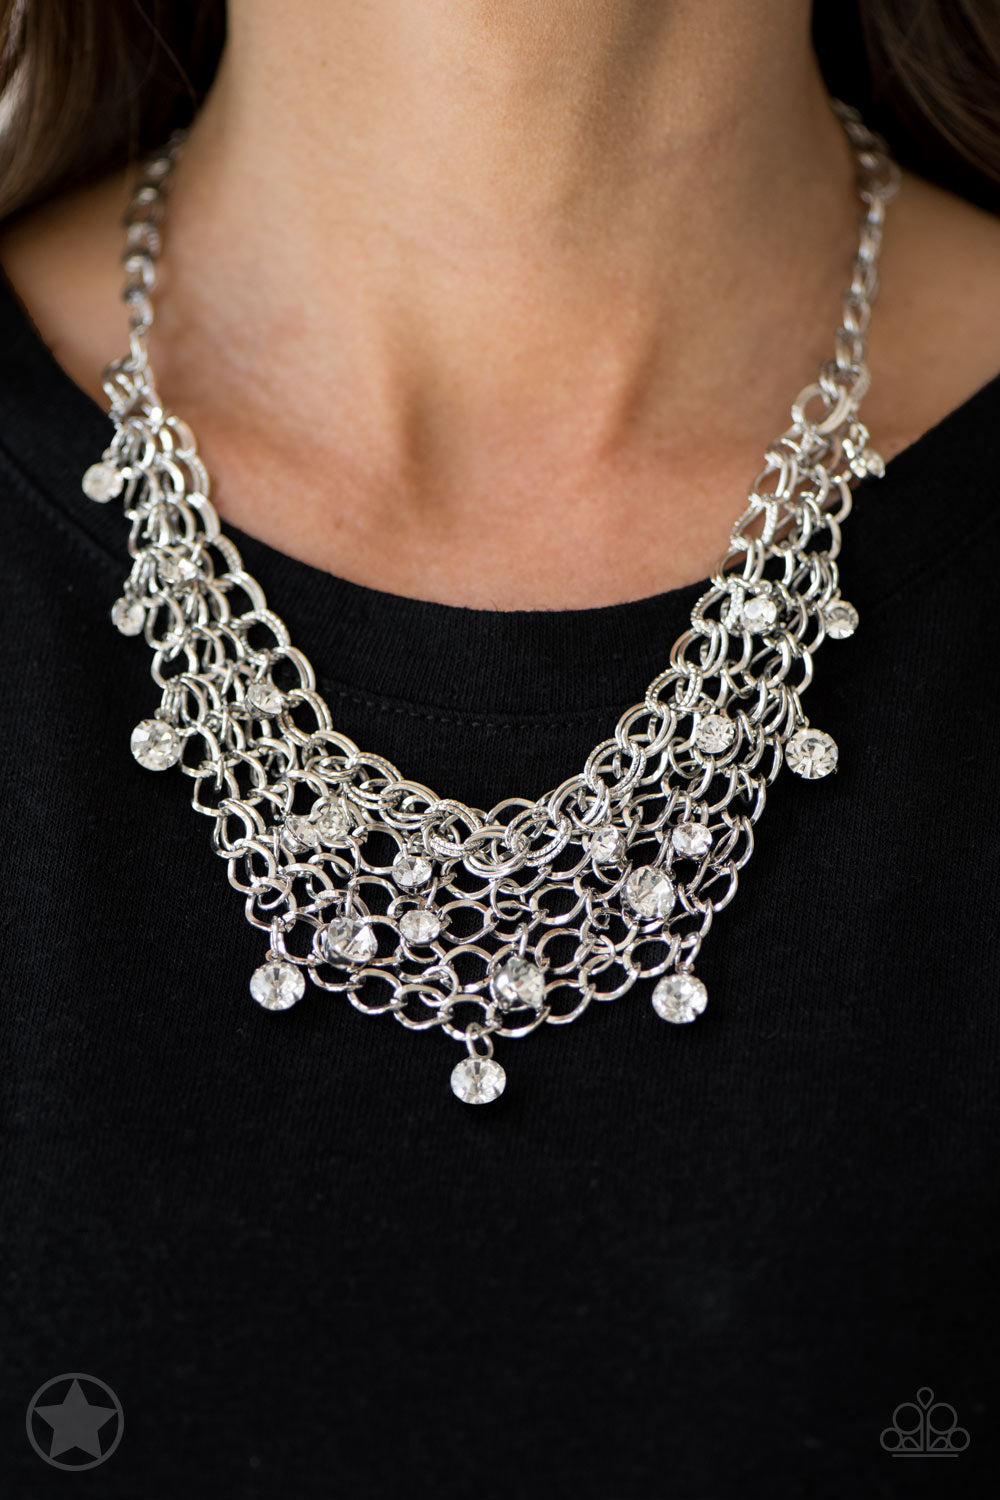 Fishing for Compliments - Silver Necklace- Blockbuster